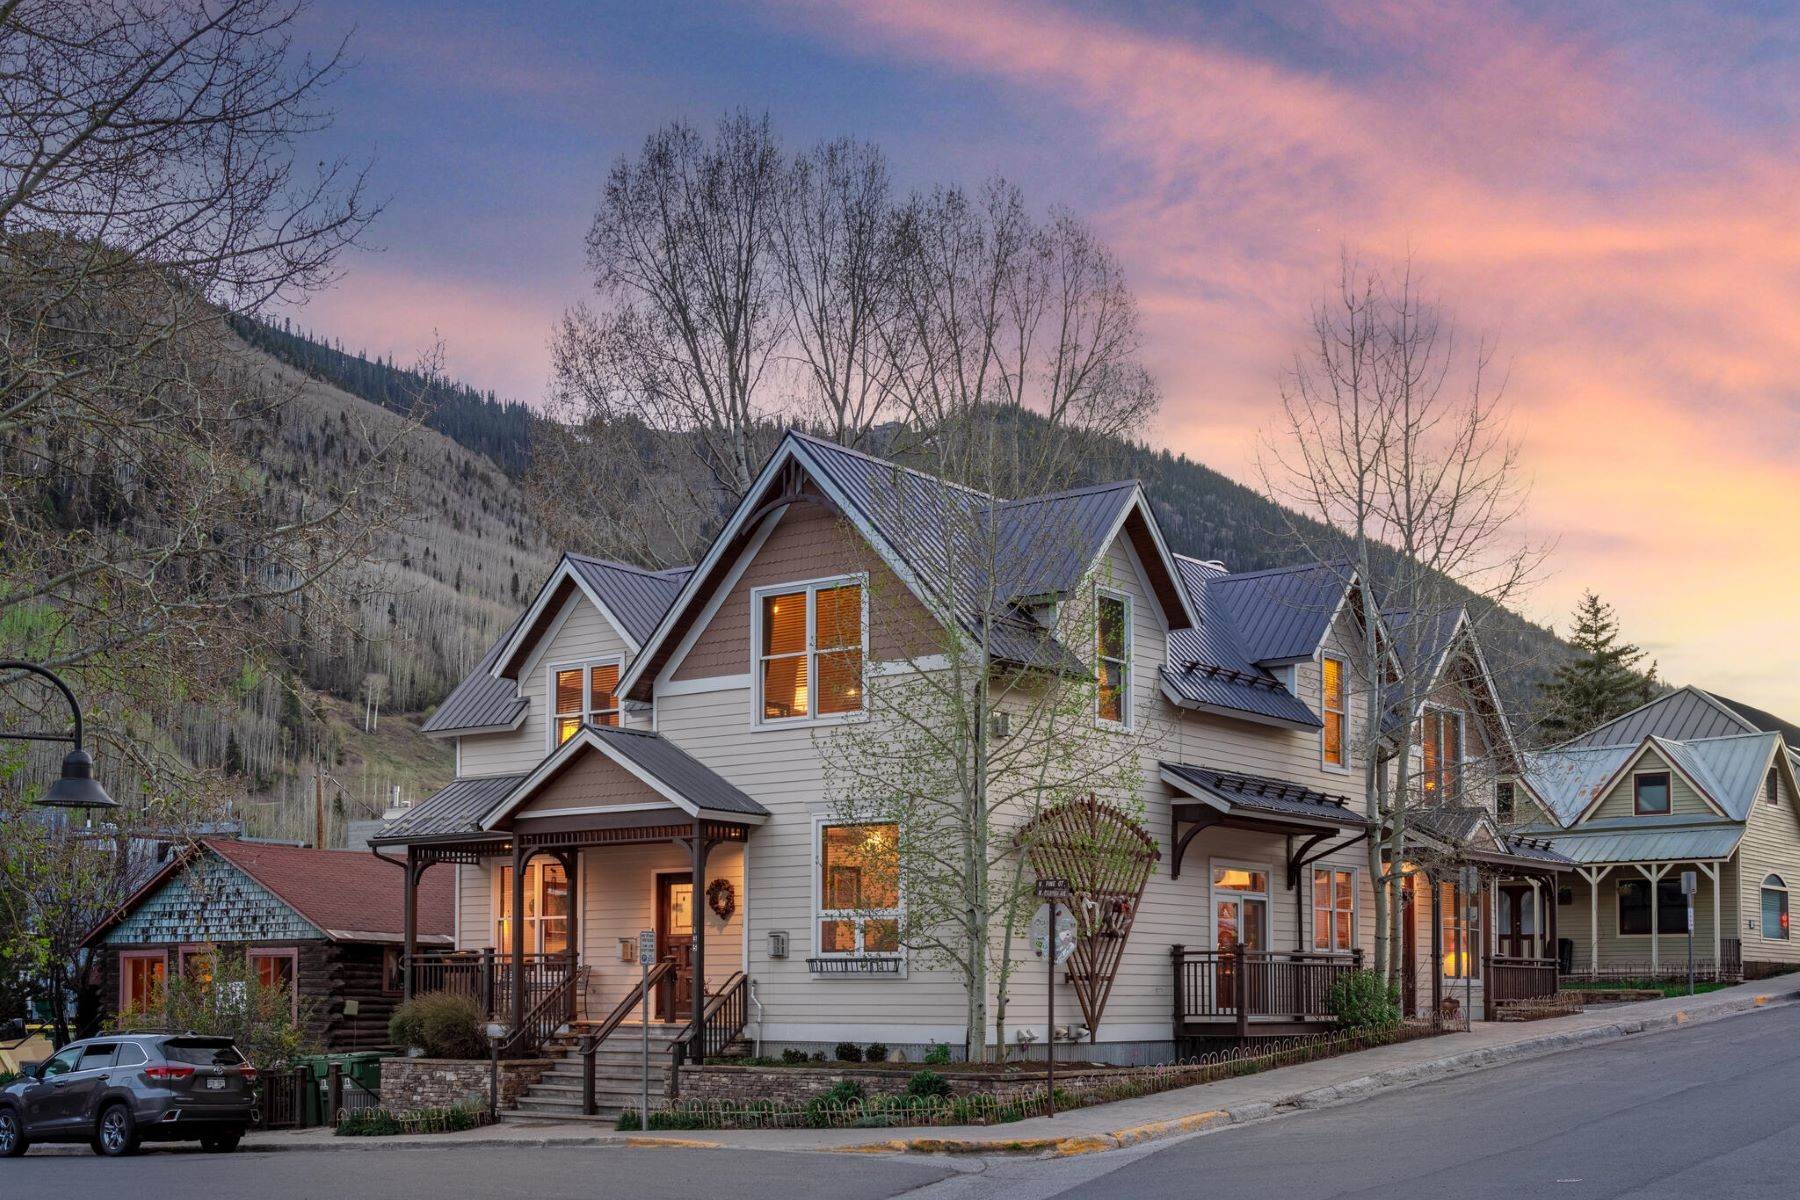 Single Family Homes for Active at 135 North Pine Street, Telluride, CO 81435 135 North Pine Street Telluride, Colorado 81435 United States